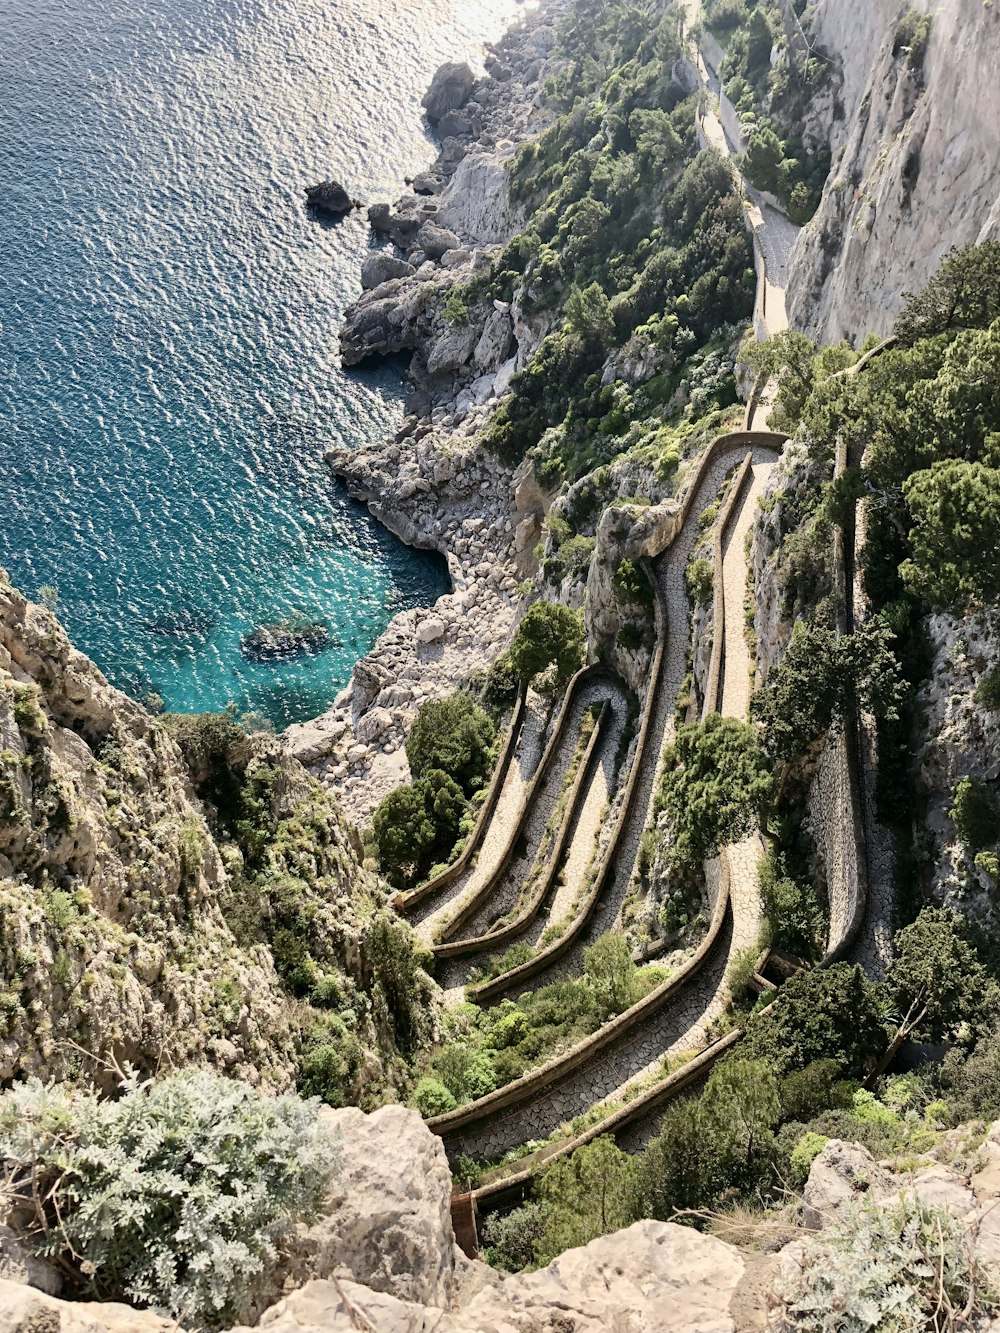 a scenic view of a winding road next to a body of water